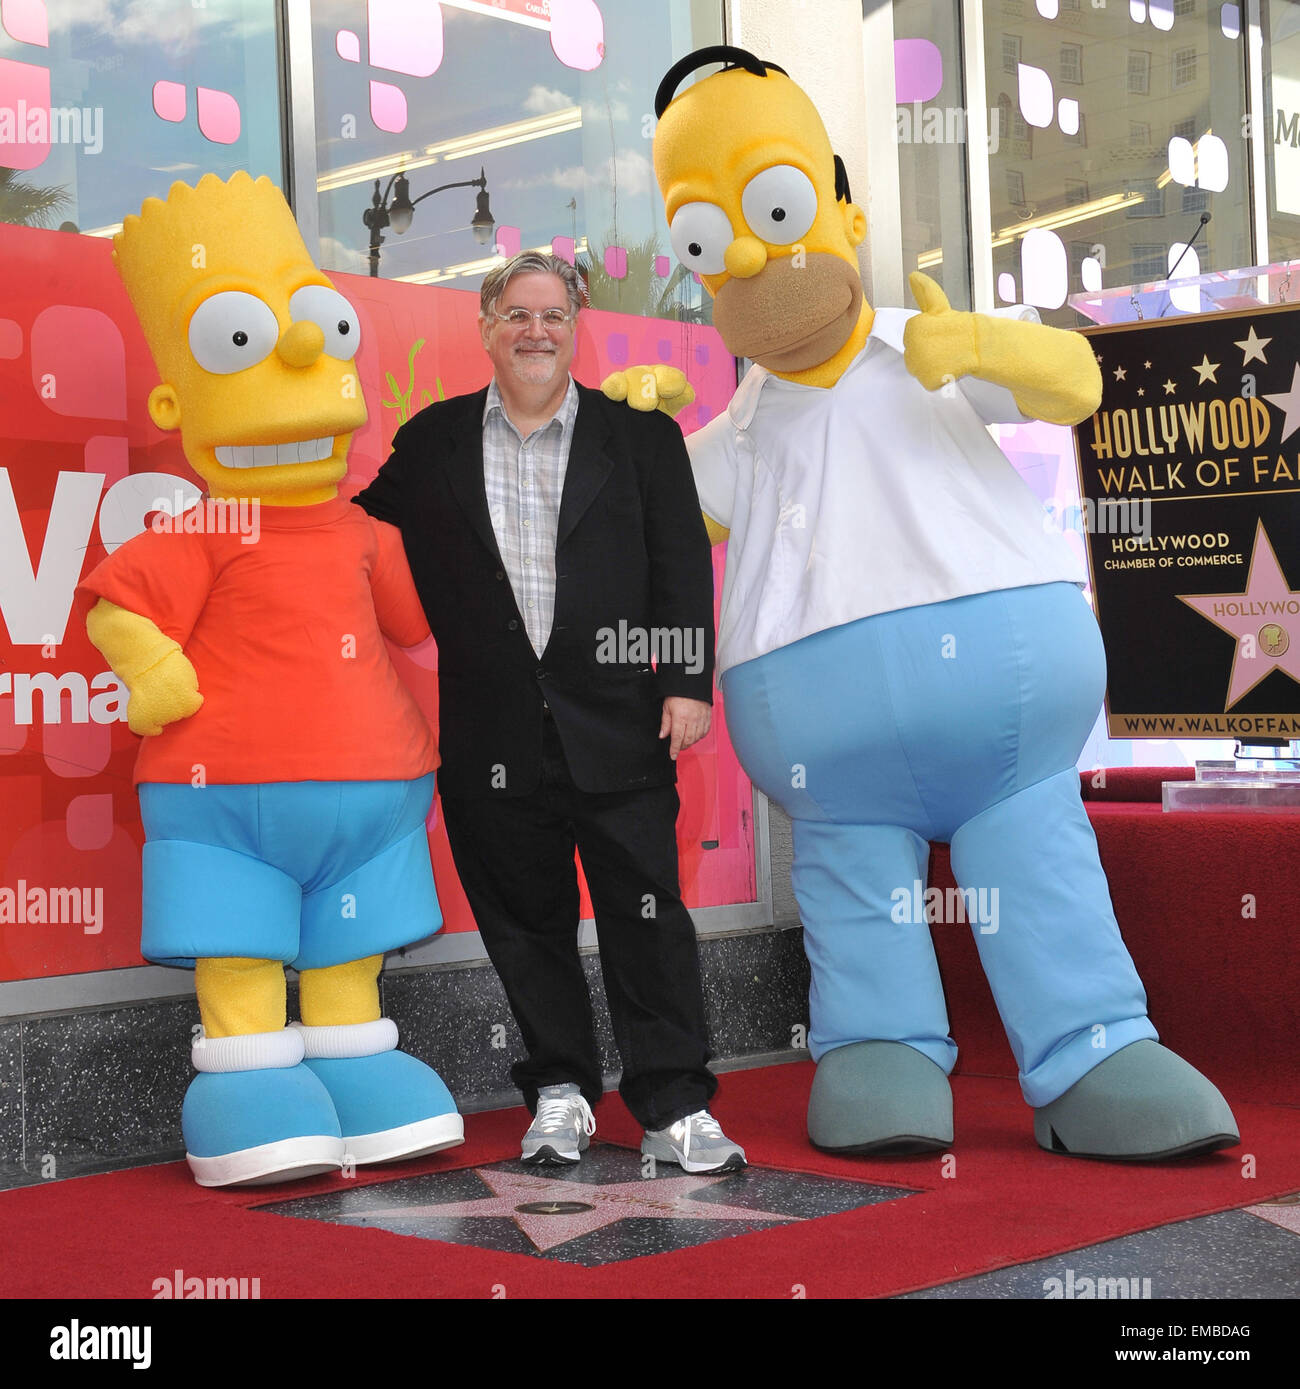 LOS ANGELES, CA - FEBRUARY 14, 2012: 'The Simpsons' creator Matt Groening on Hollywood Boulevard where he was honored with the 2,459th star on the Hollywood Walk of Fame. February 14, 2012 Los Angeles, CA Stock Photo